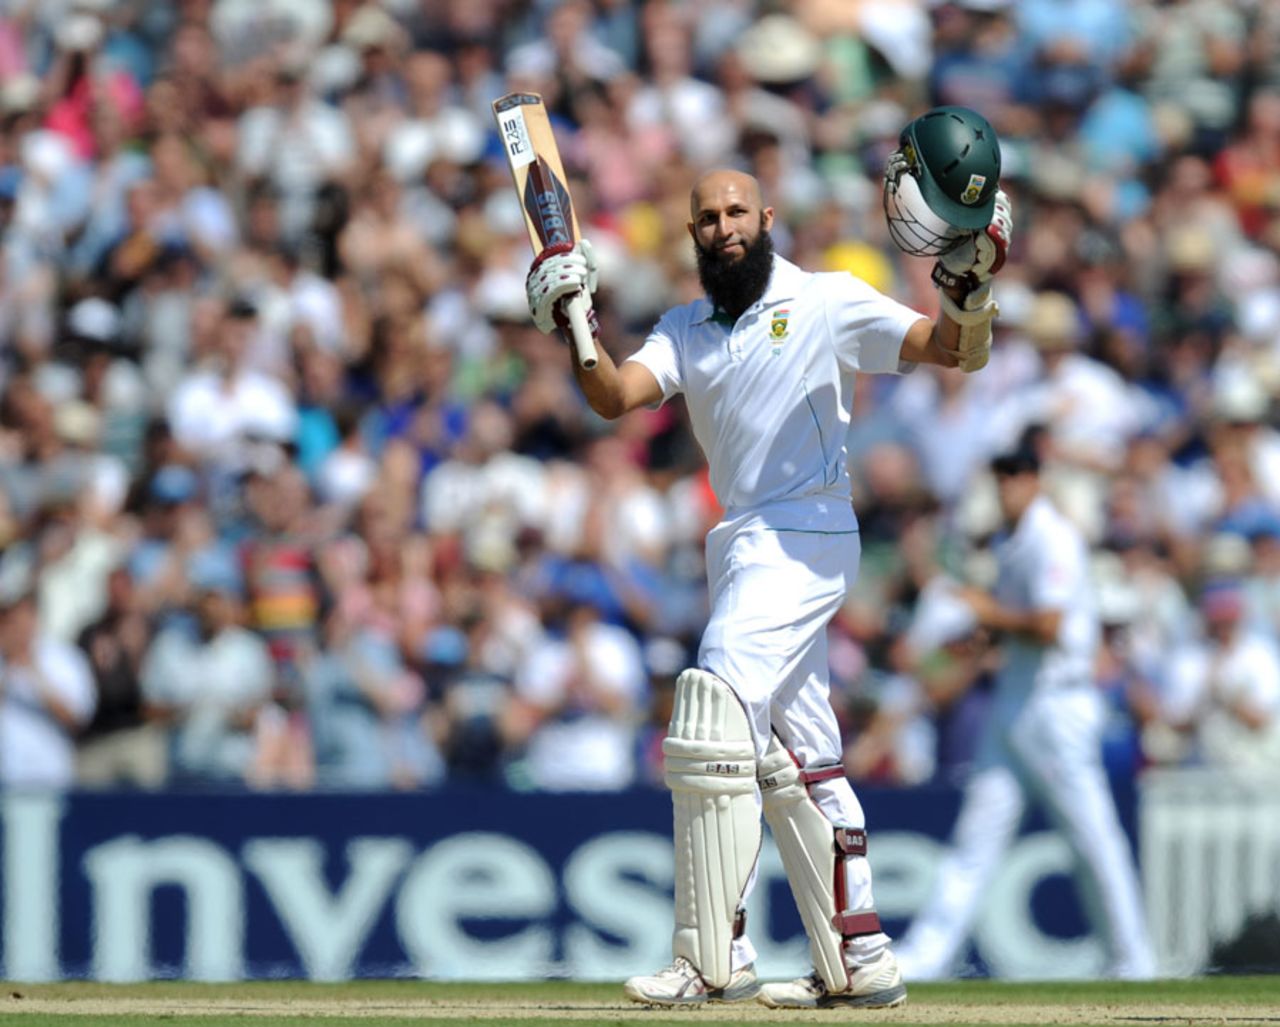 Hashim Amla takes in the applause for his double hundred, England v South Africa, 1st Investec Test, The Oval, 4th day, July, 22, 2012